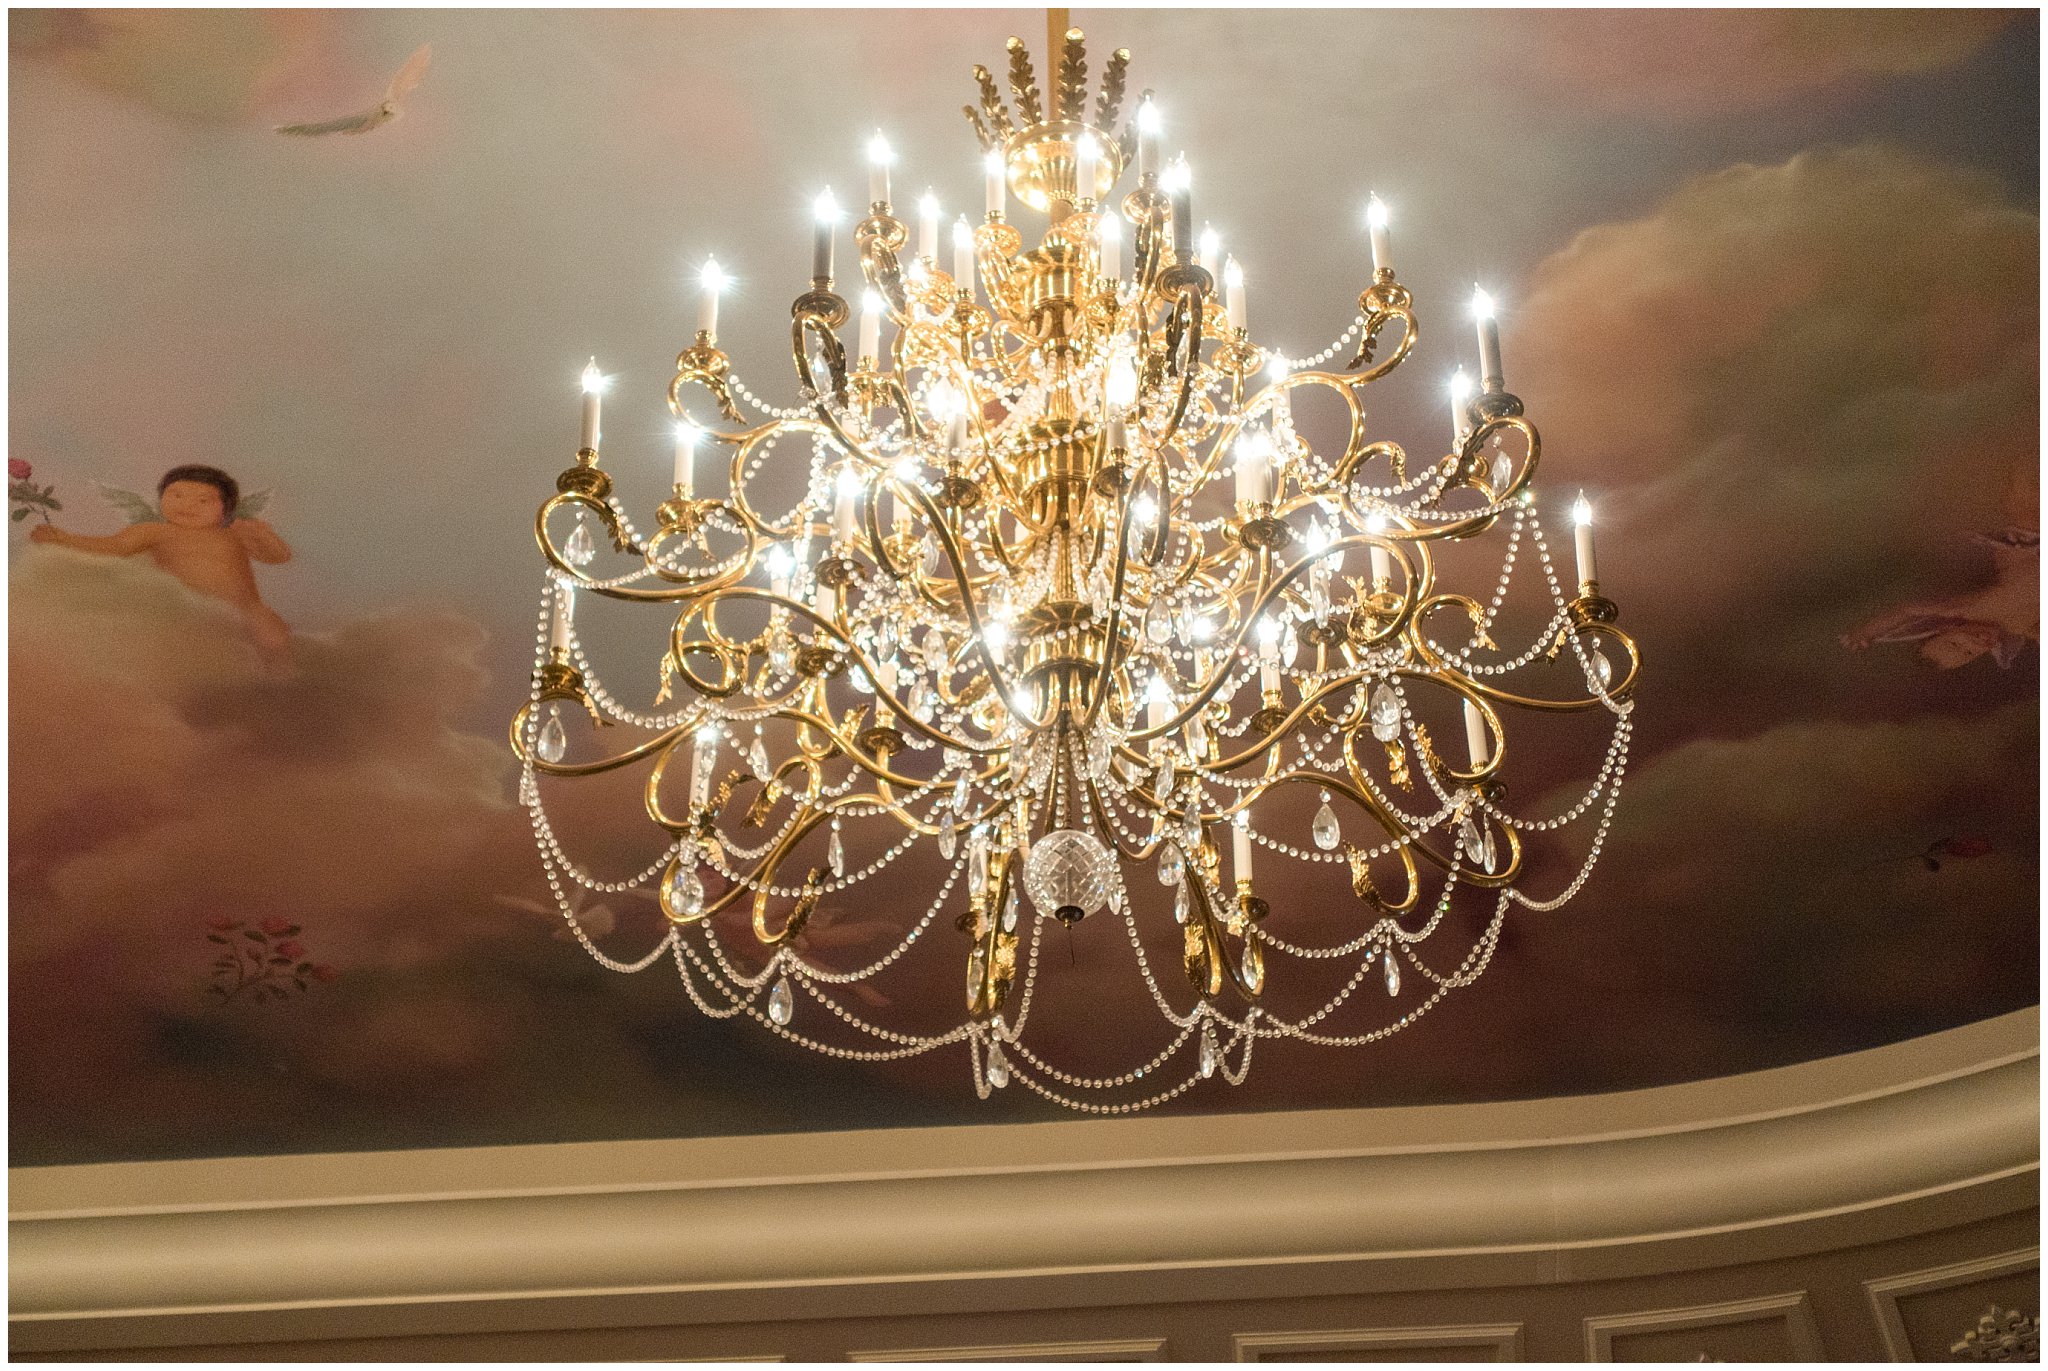 Chandelier in Be Our Guest Restaurant Ballroom